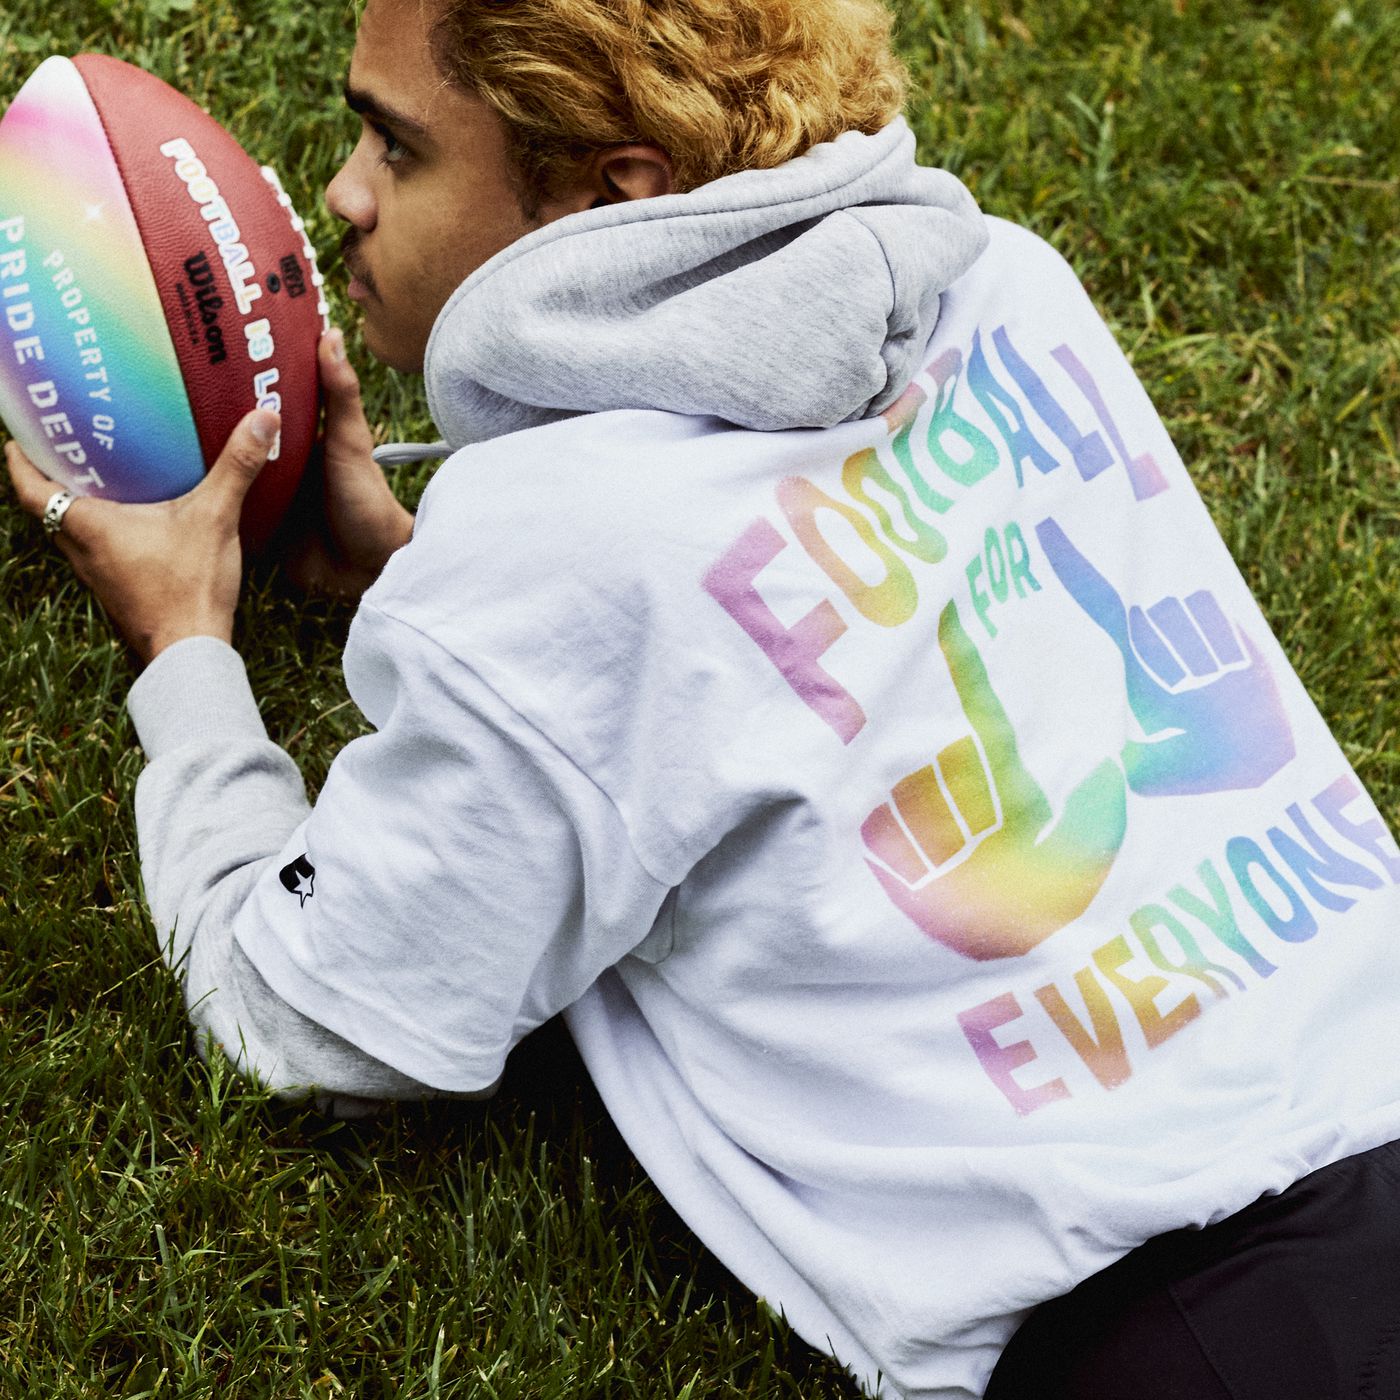 Official NFL Shop - Celebrate Pride Month and be a proud fan of